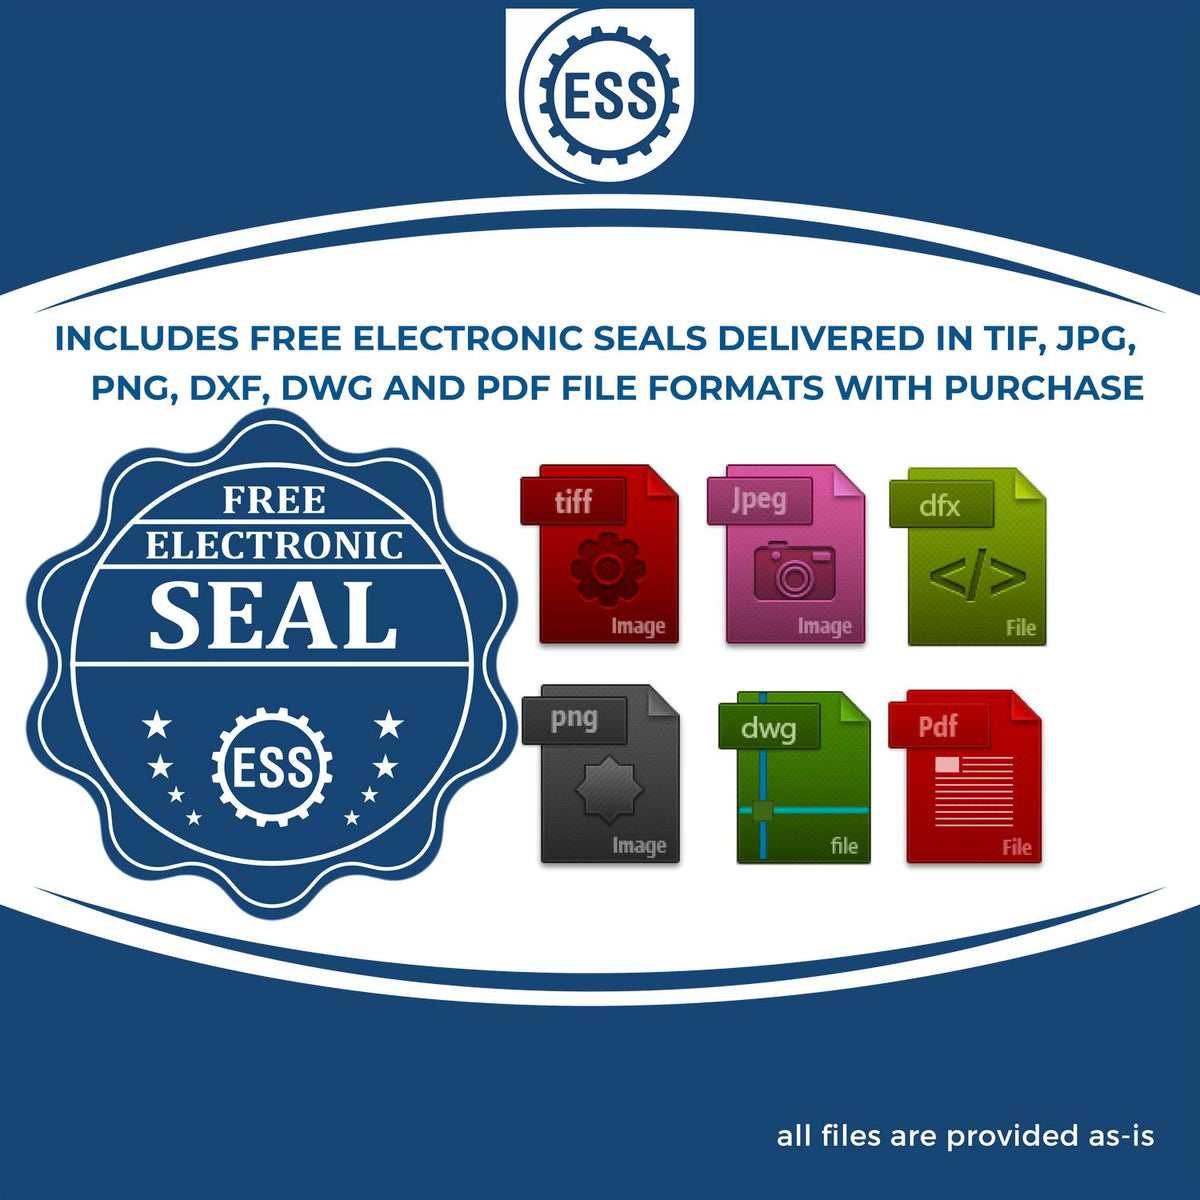 An infographic for the free electronic seal for the Slim Pre-Inked West Virginia Architect Seal Stamp illustrating the different file type icons such as DXF, DWG, TIF, JPG and PNG.